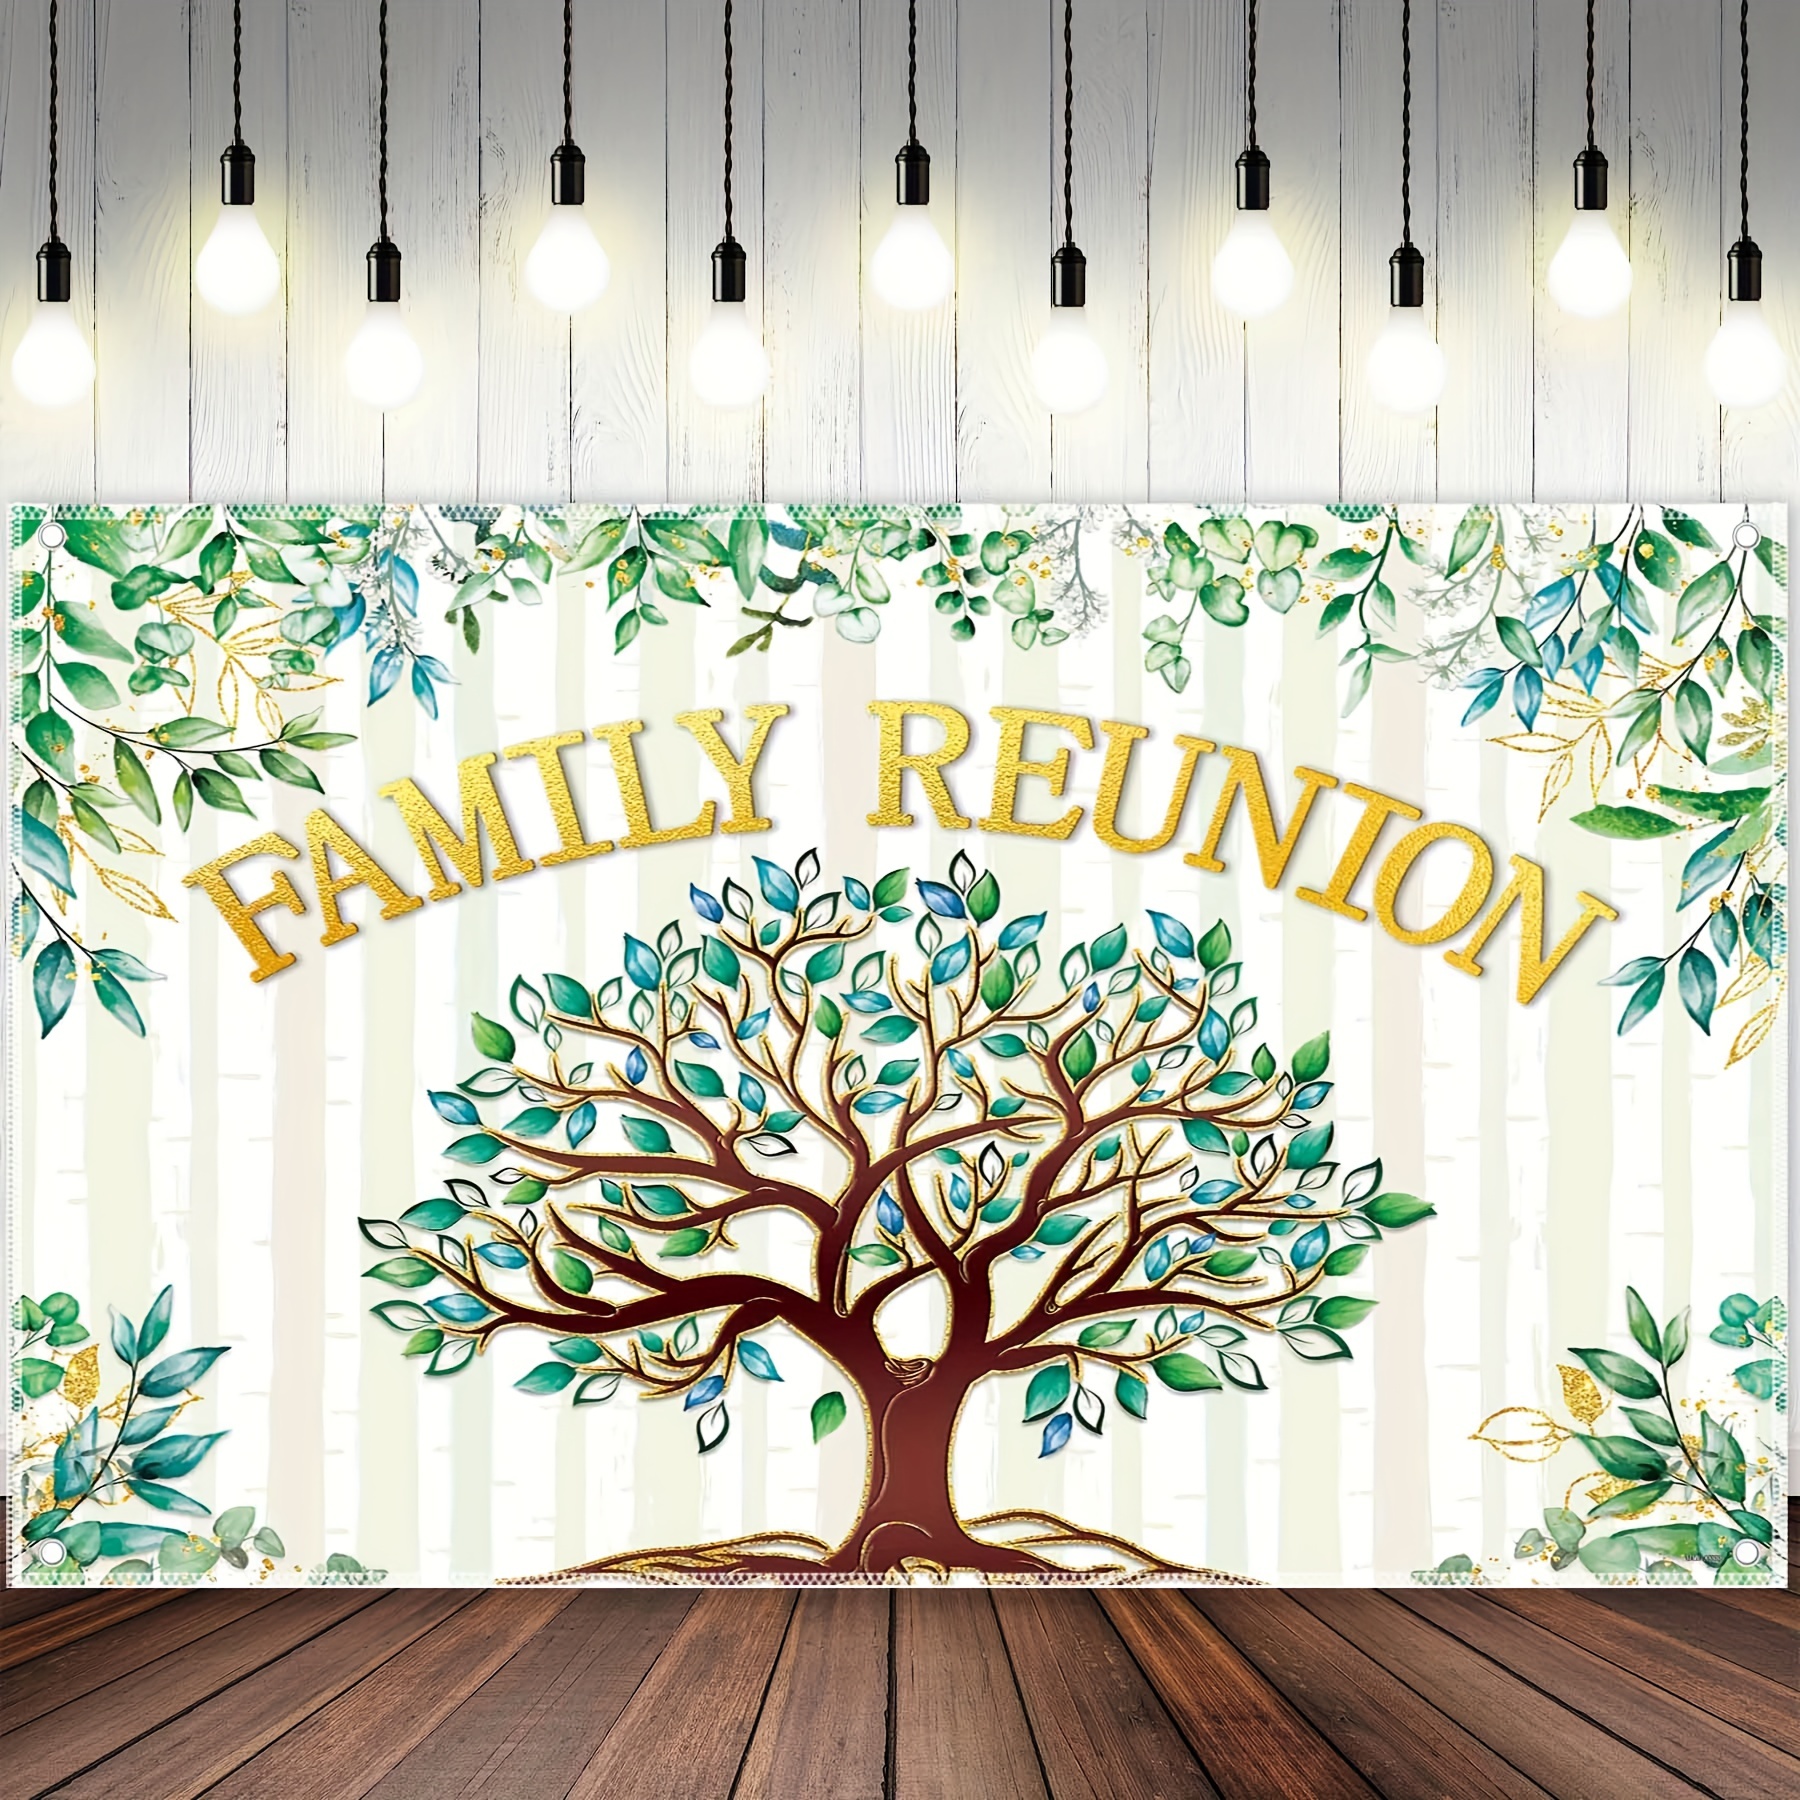 Blue Welcome Home Backdrop Decorations Welcome Home We Missed You So Much  Background Decor for Family Reunion Homecoming Party